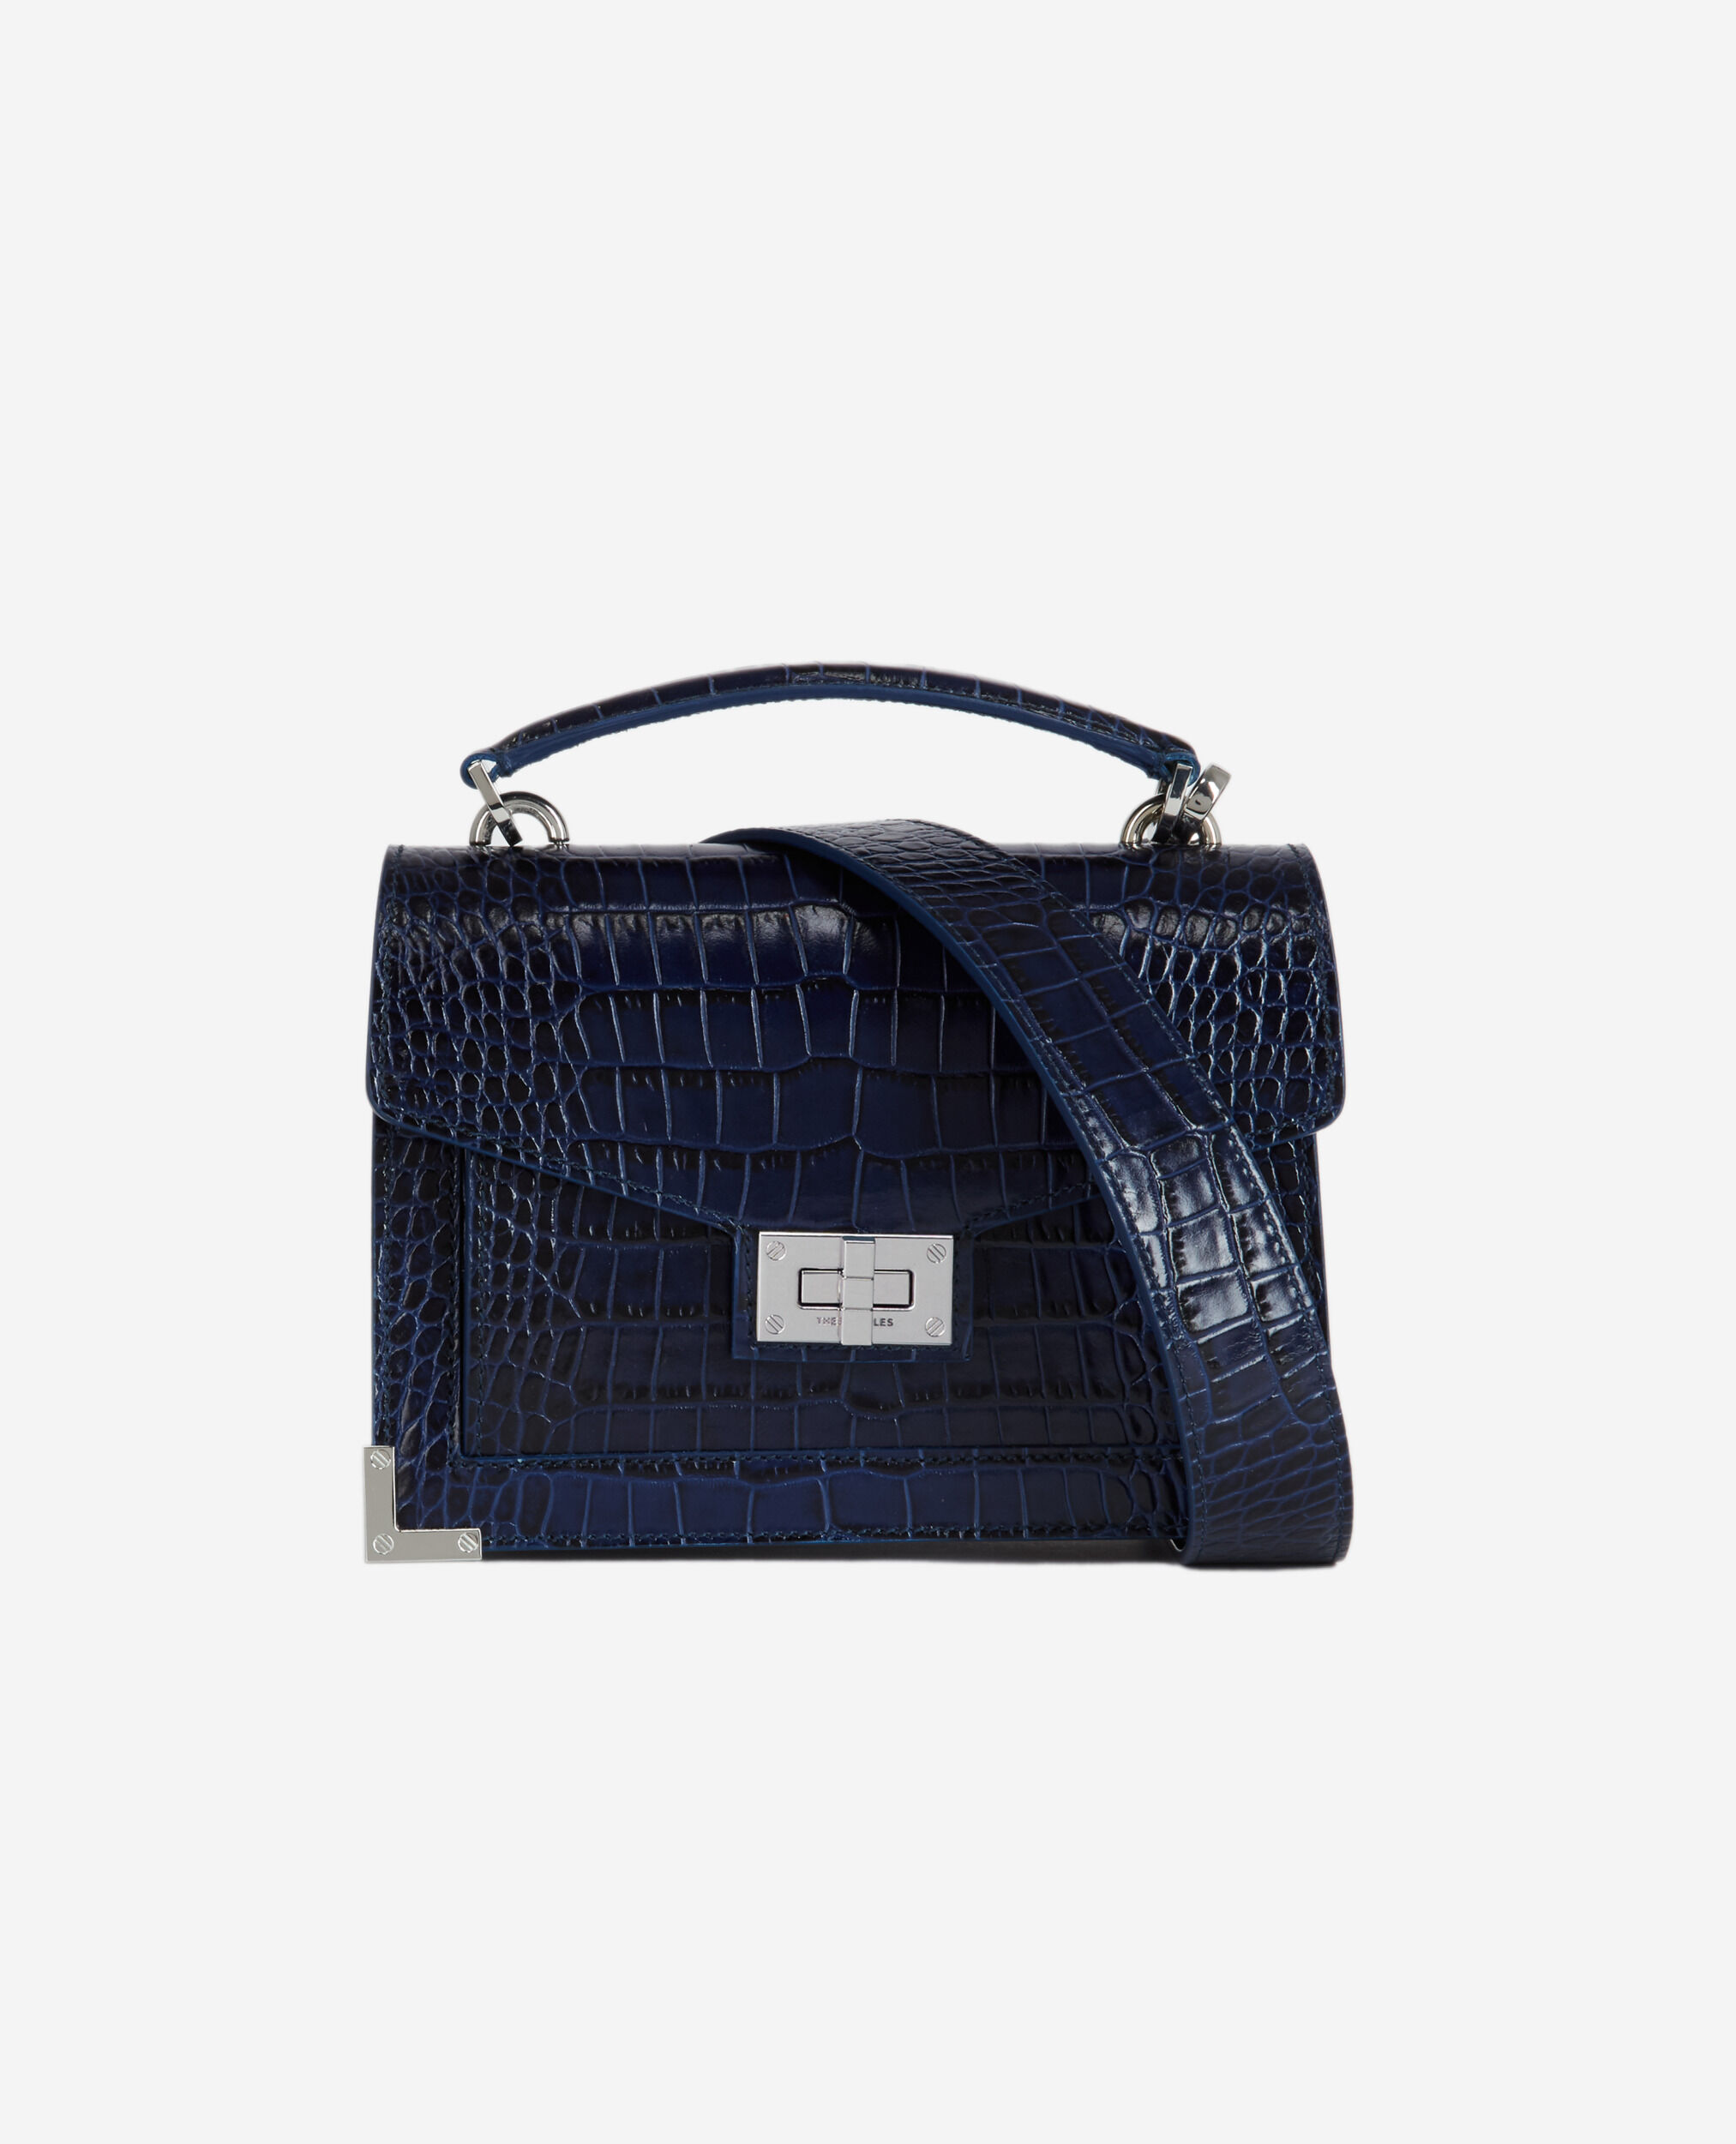 Small Emily bag in blue leather, DARK NAVY, hi-res image number null